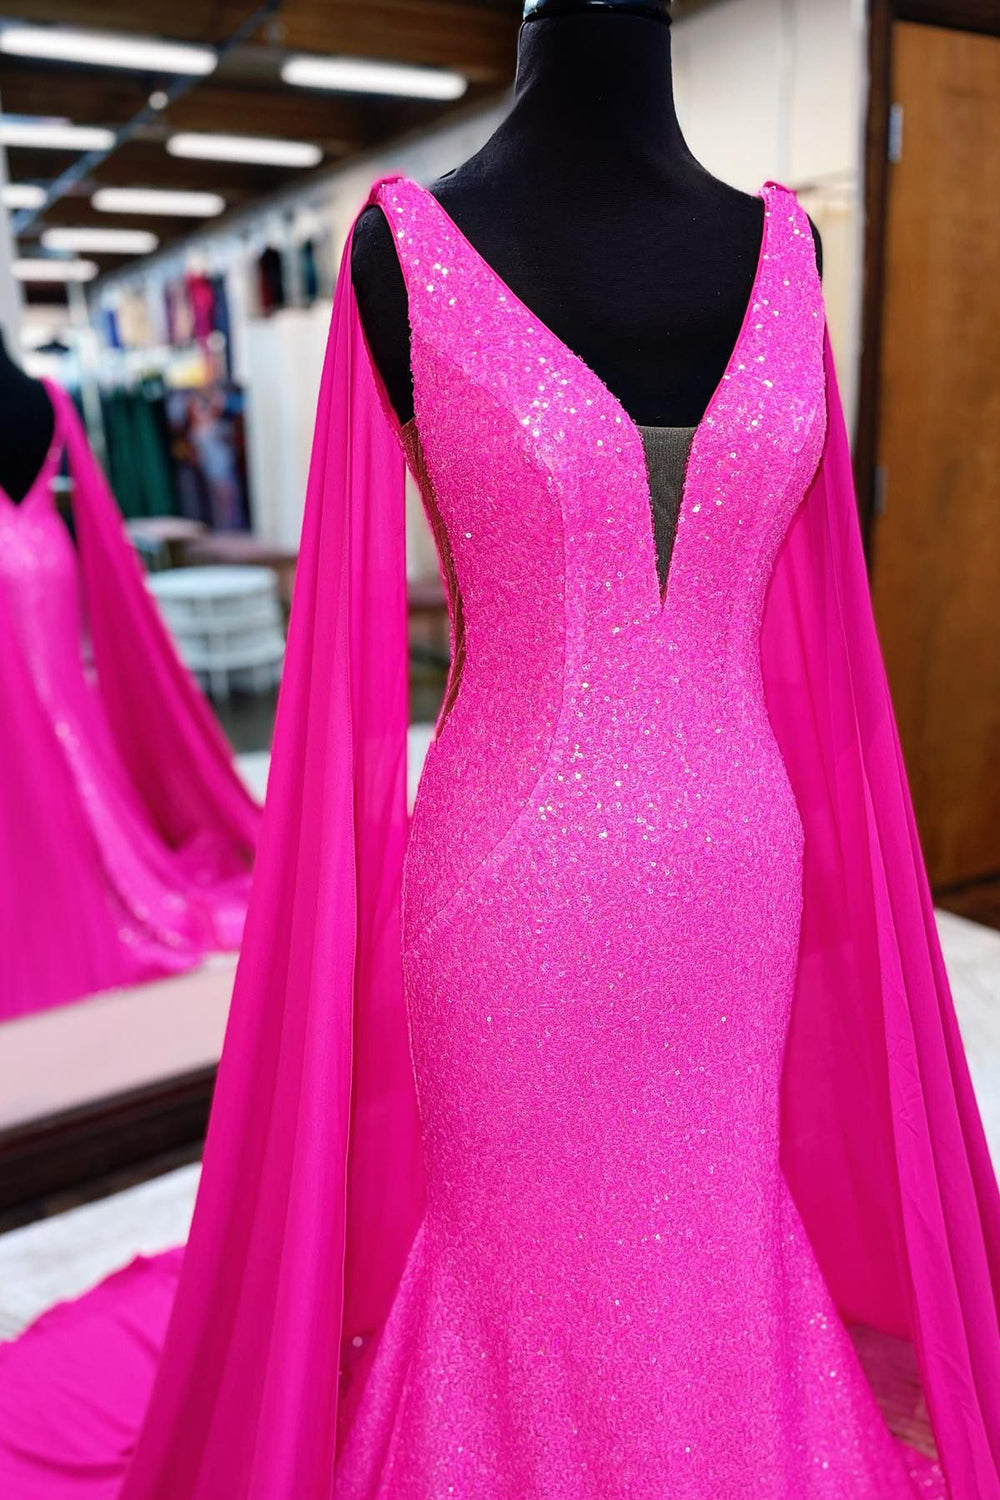 Hot Pink Mermaid Corset Prom Dress With Wateau Train Gowns, Party Dress Ideas